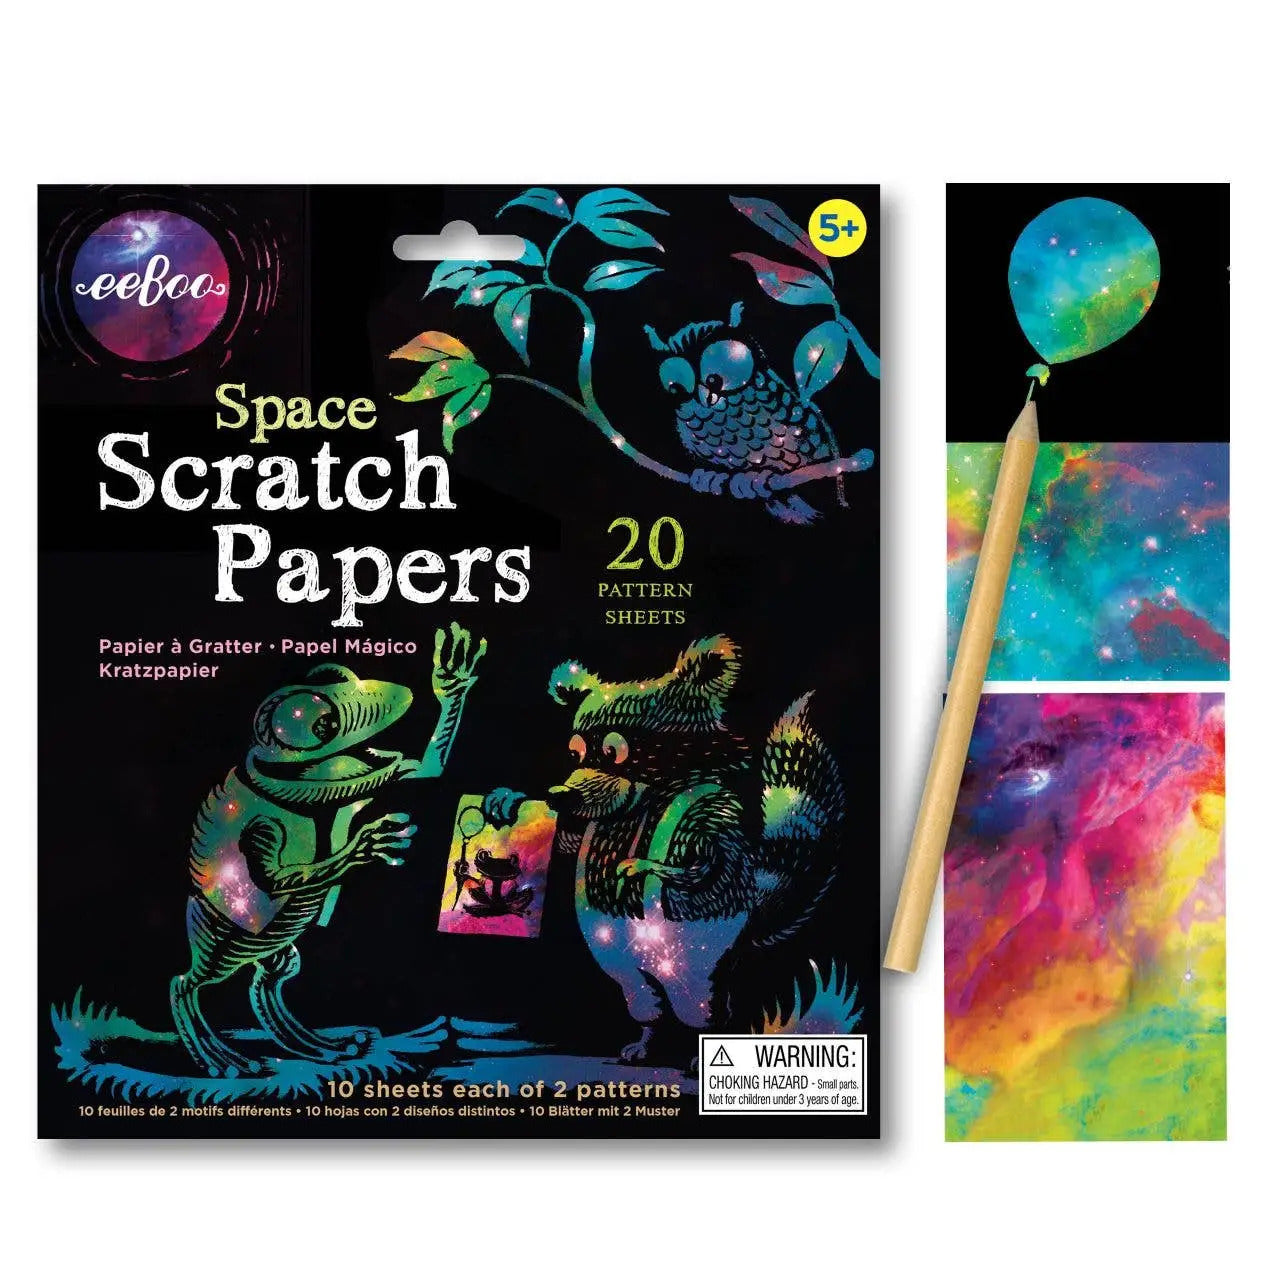 Space Scratch Papers (20 Sheets) - eeBoo